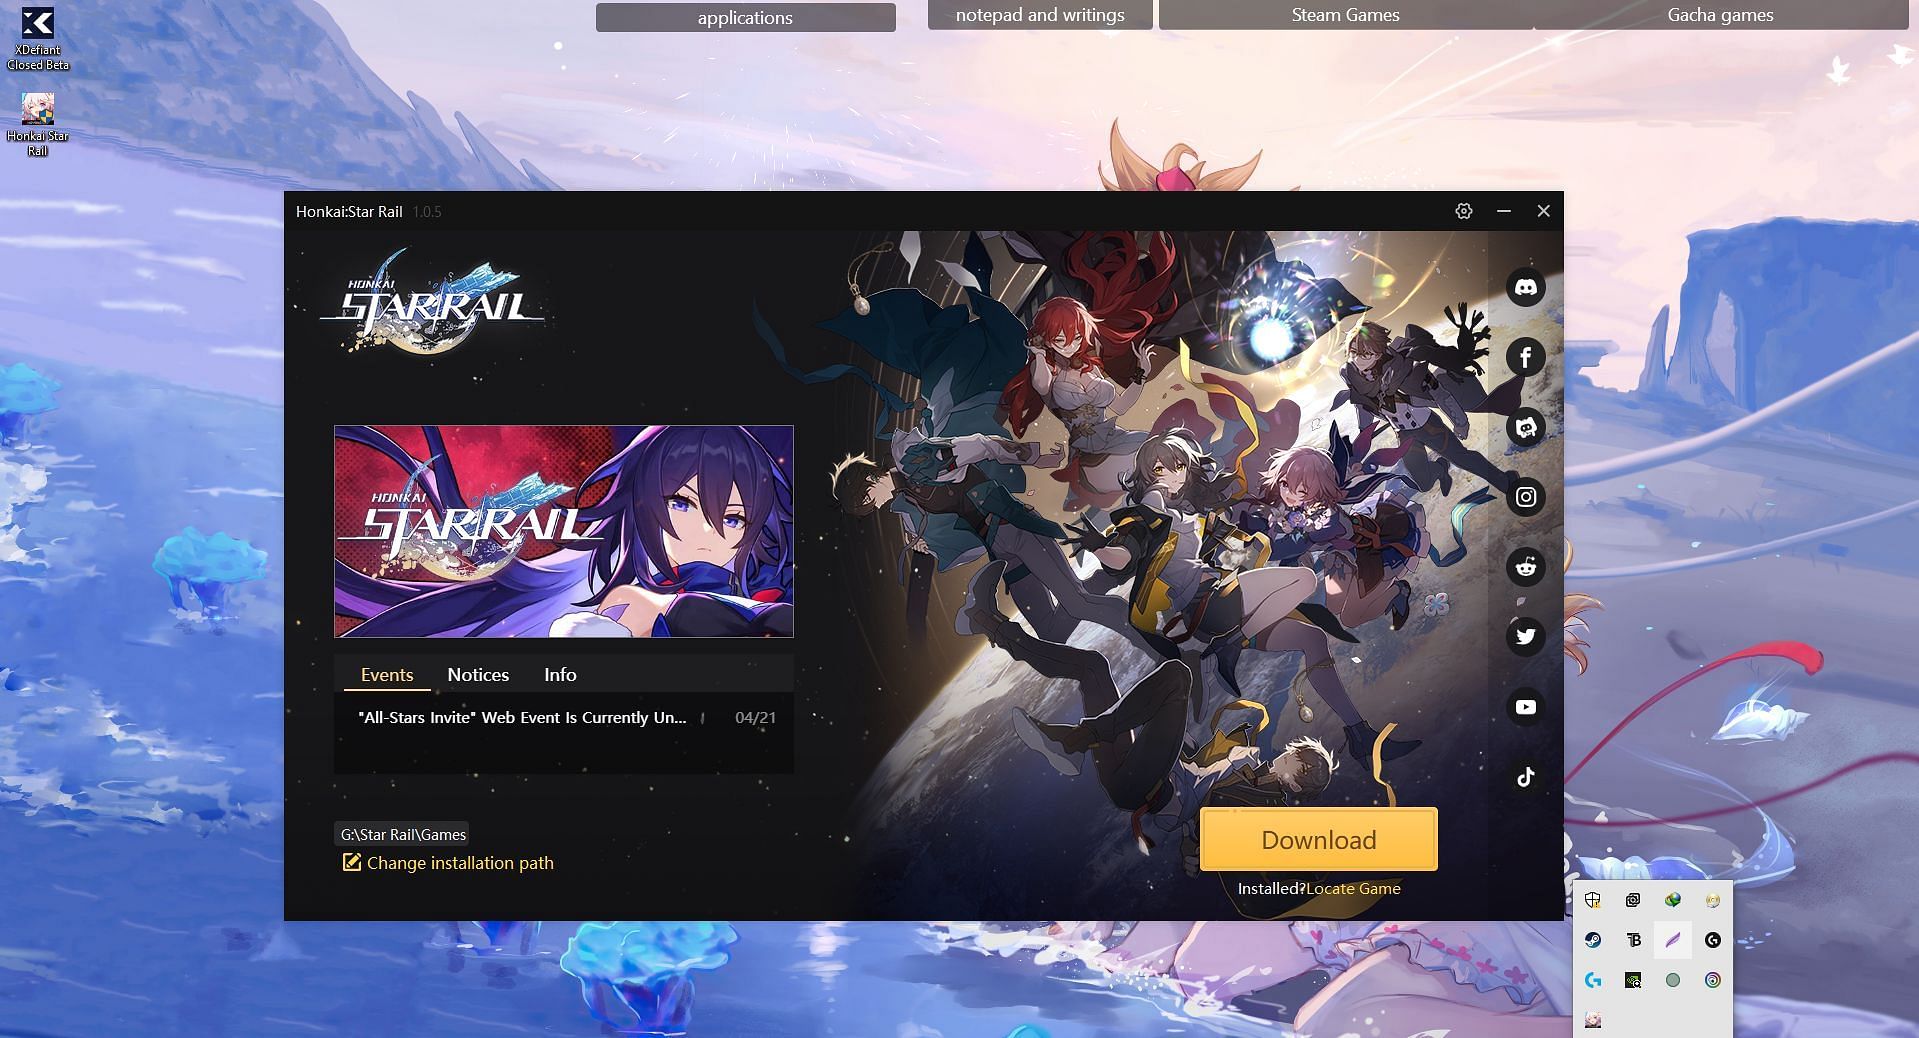 How To Download New Game Honkai Star Rail In PC